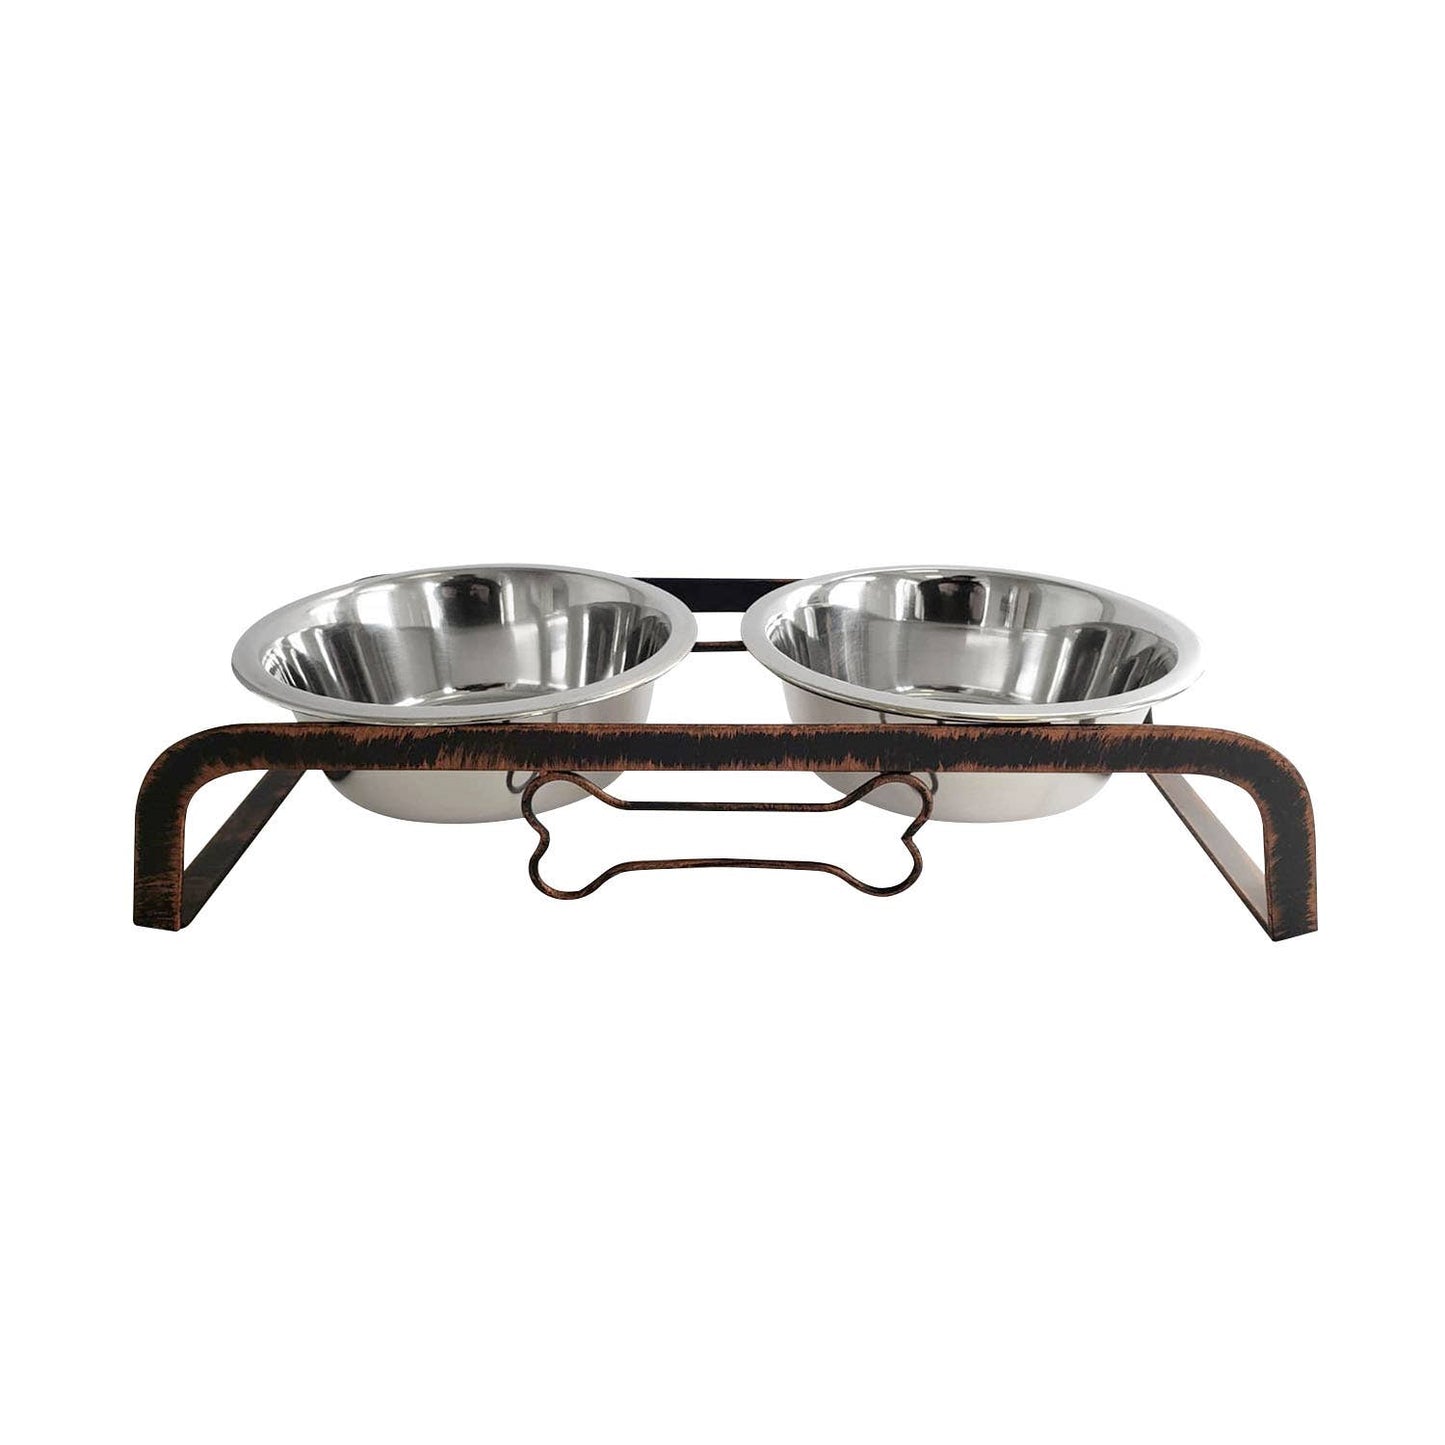 Rustic Elevated Dog Bone Feeder with 2 Stainless Steel Bowls: 2 Quarts